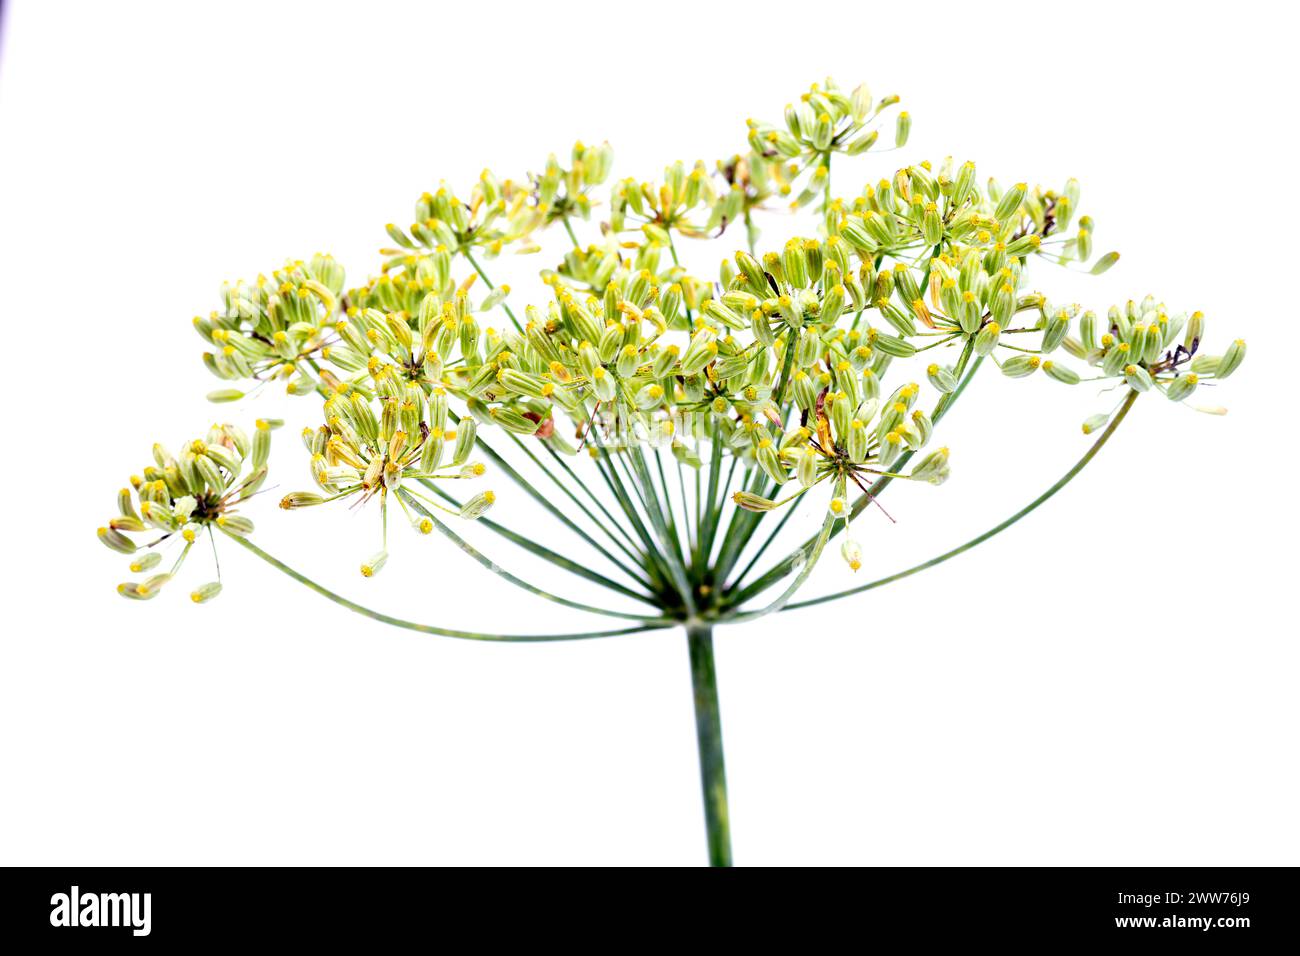 Dill seeds on white background for cooking and herbal medicine. Stock Photo